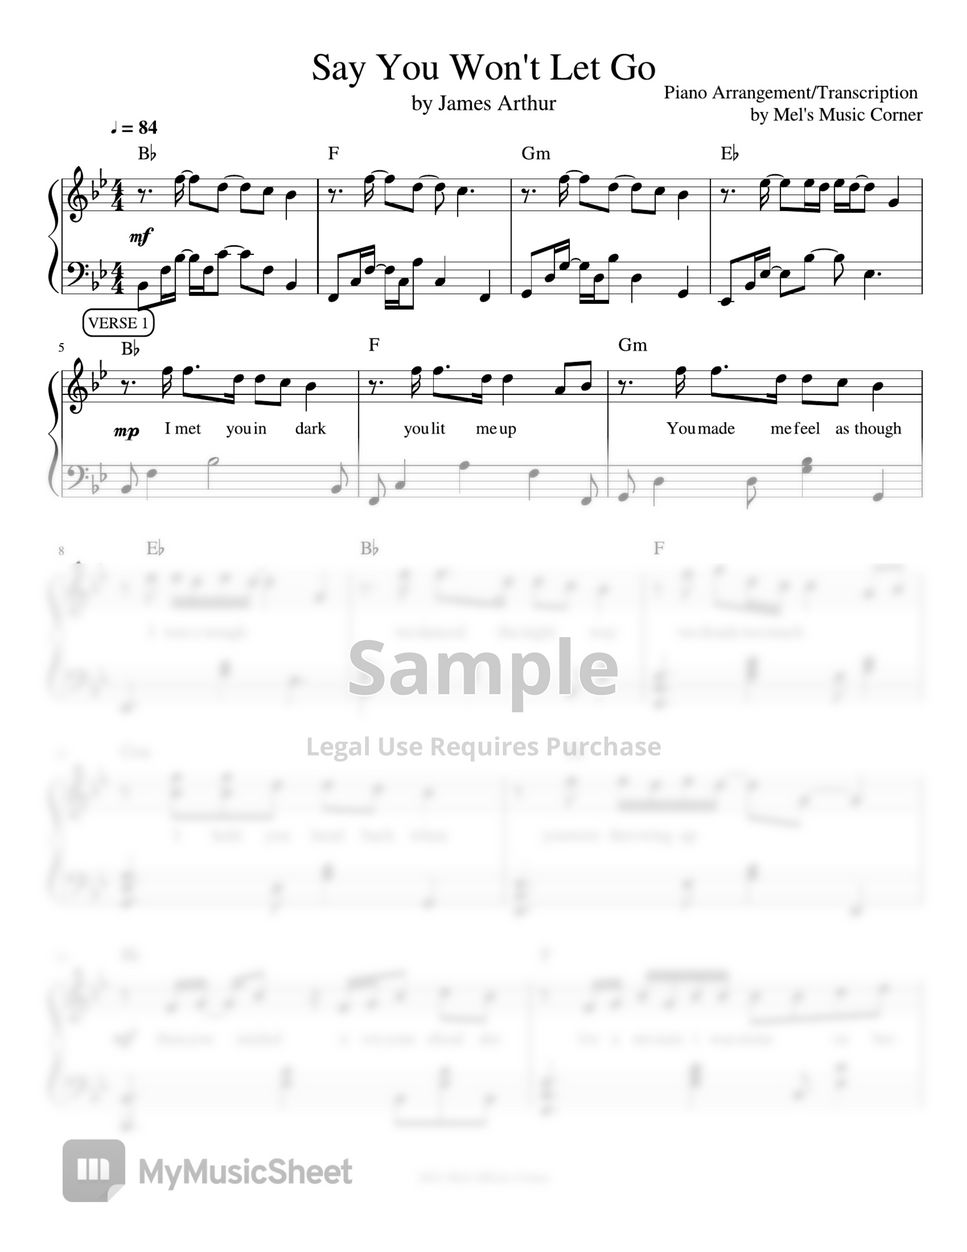 James Arthur - Say You Won't Let Go (piano sheet music) by Mel's Music Corner